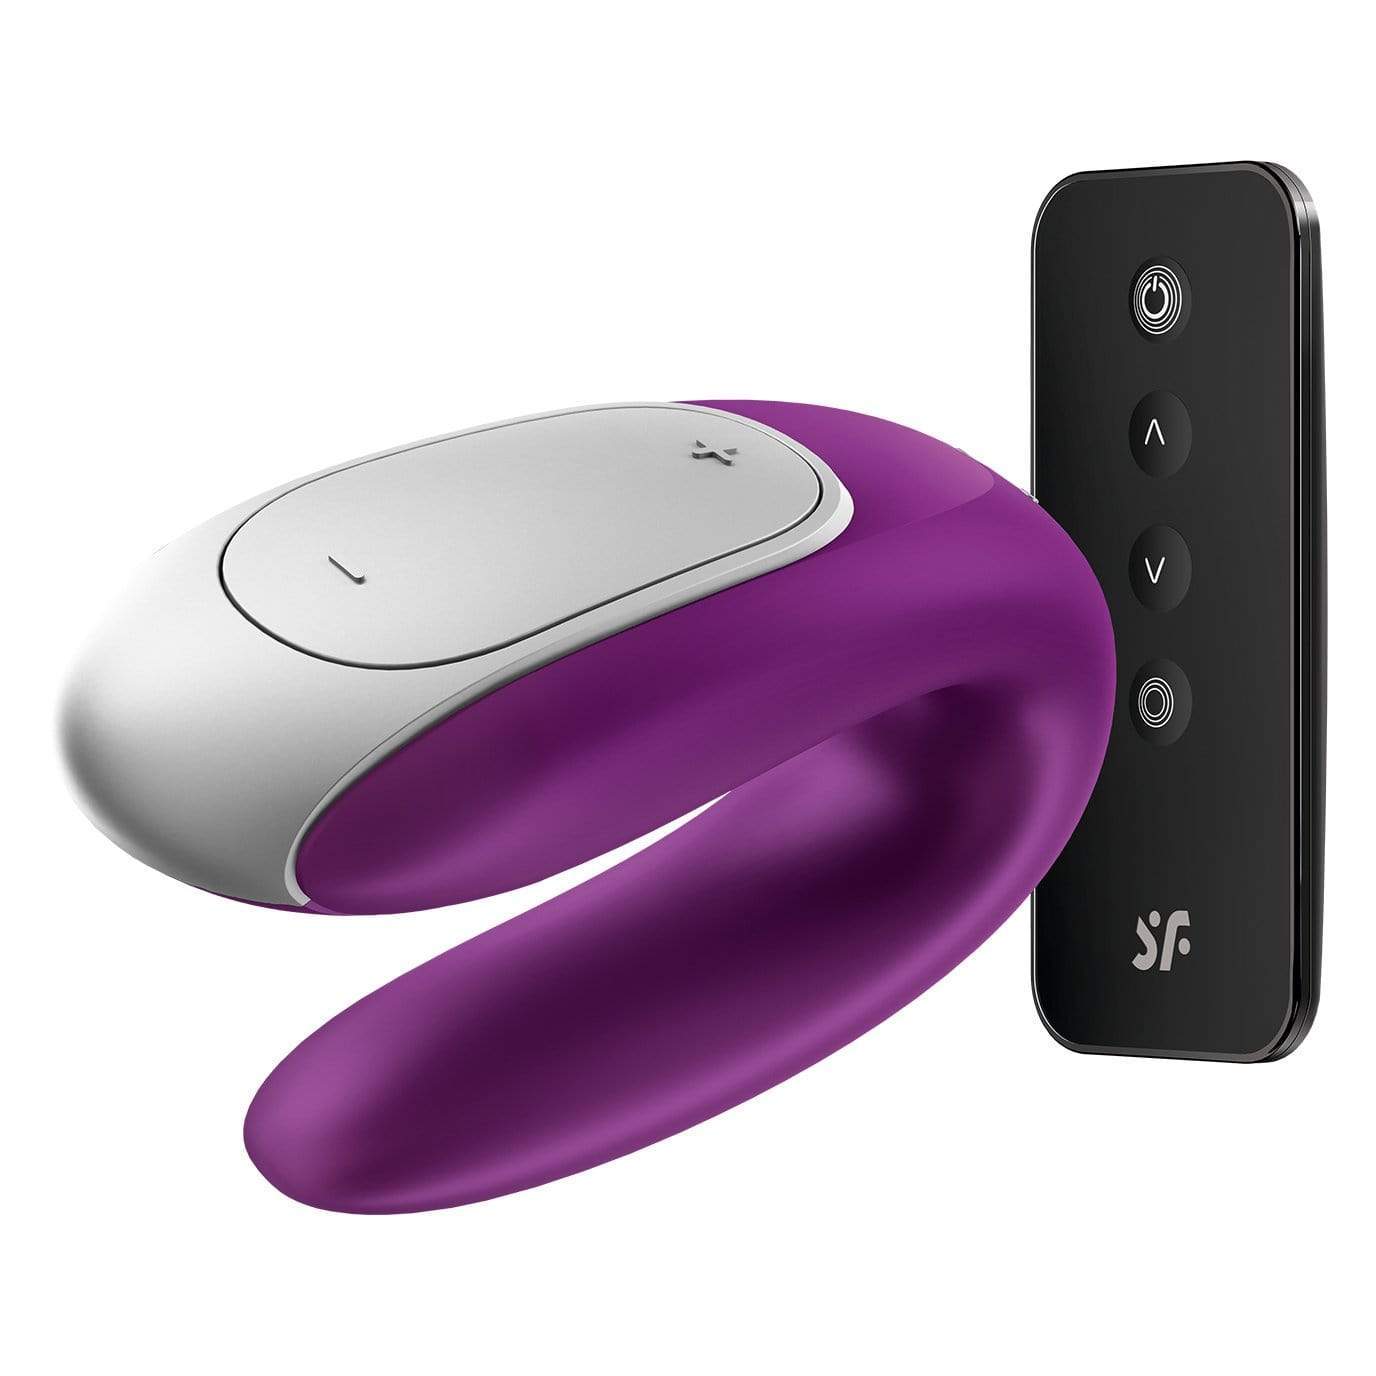 Satisfyer - Double Fun App-Controlled Couple's Vibrator with Remote Control (Purple) Remote Control Couple's Massager (Vibration) Rechargeable 4061504002460 CherryAffairs